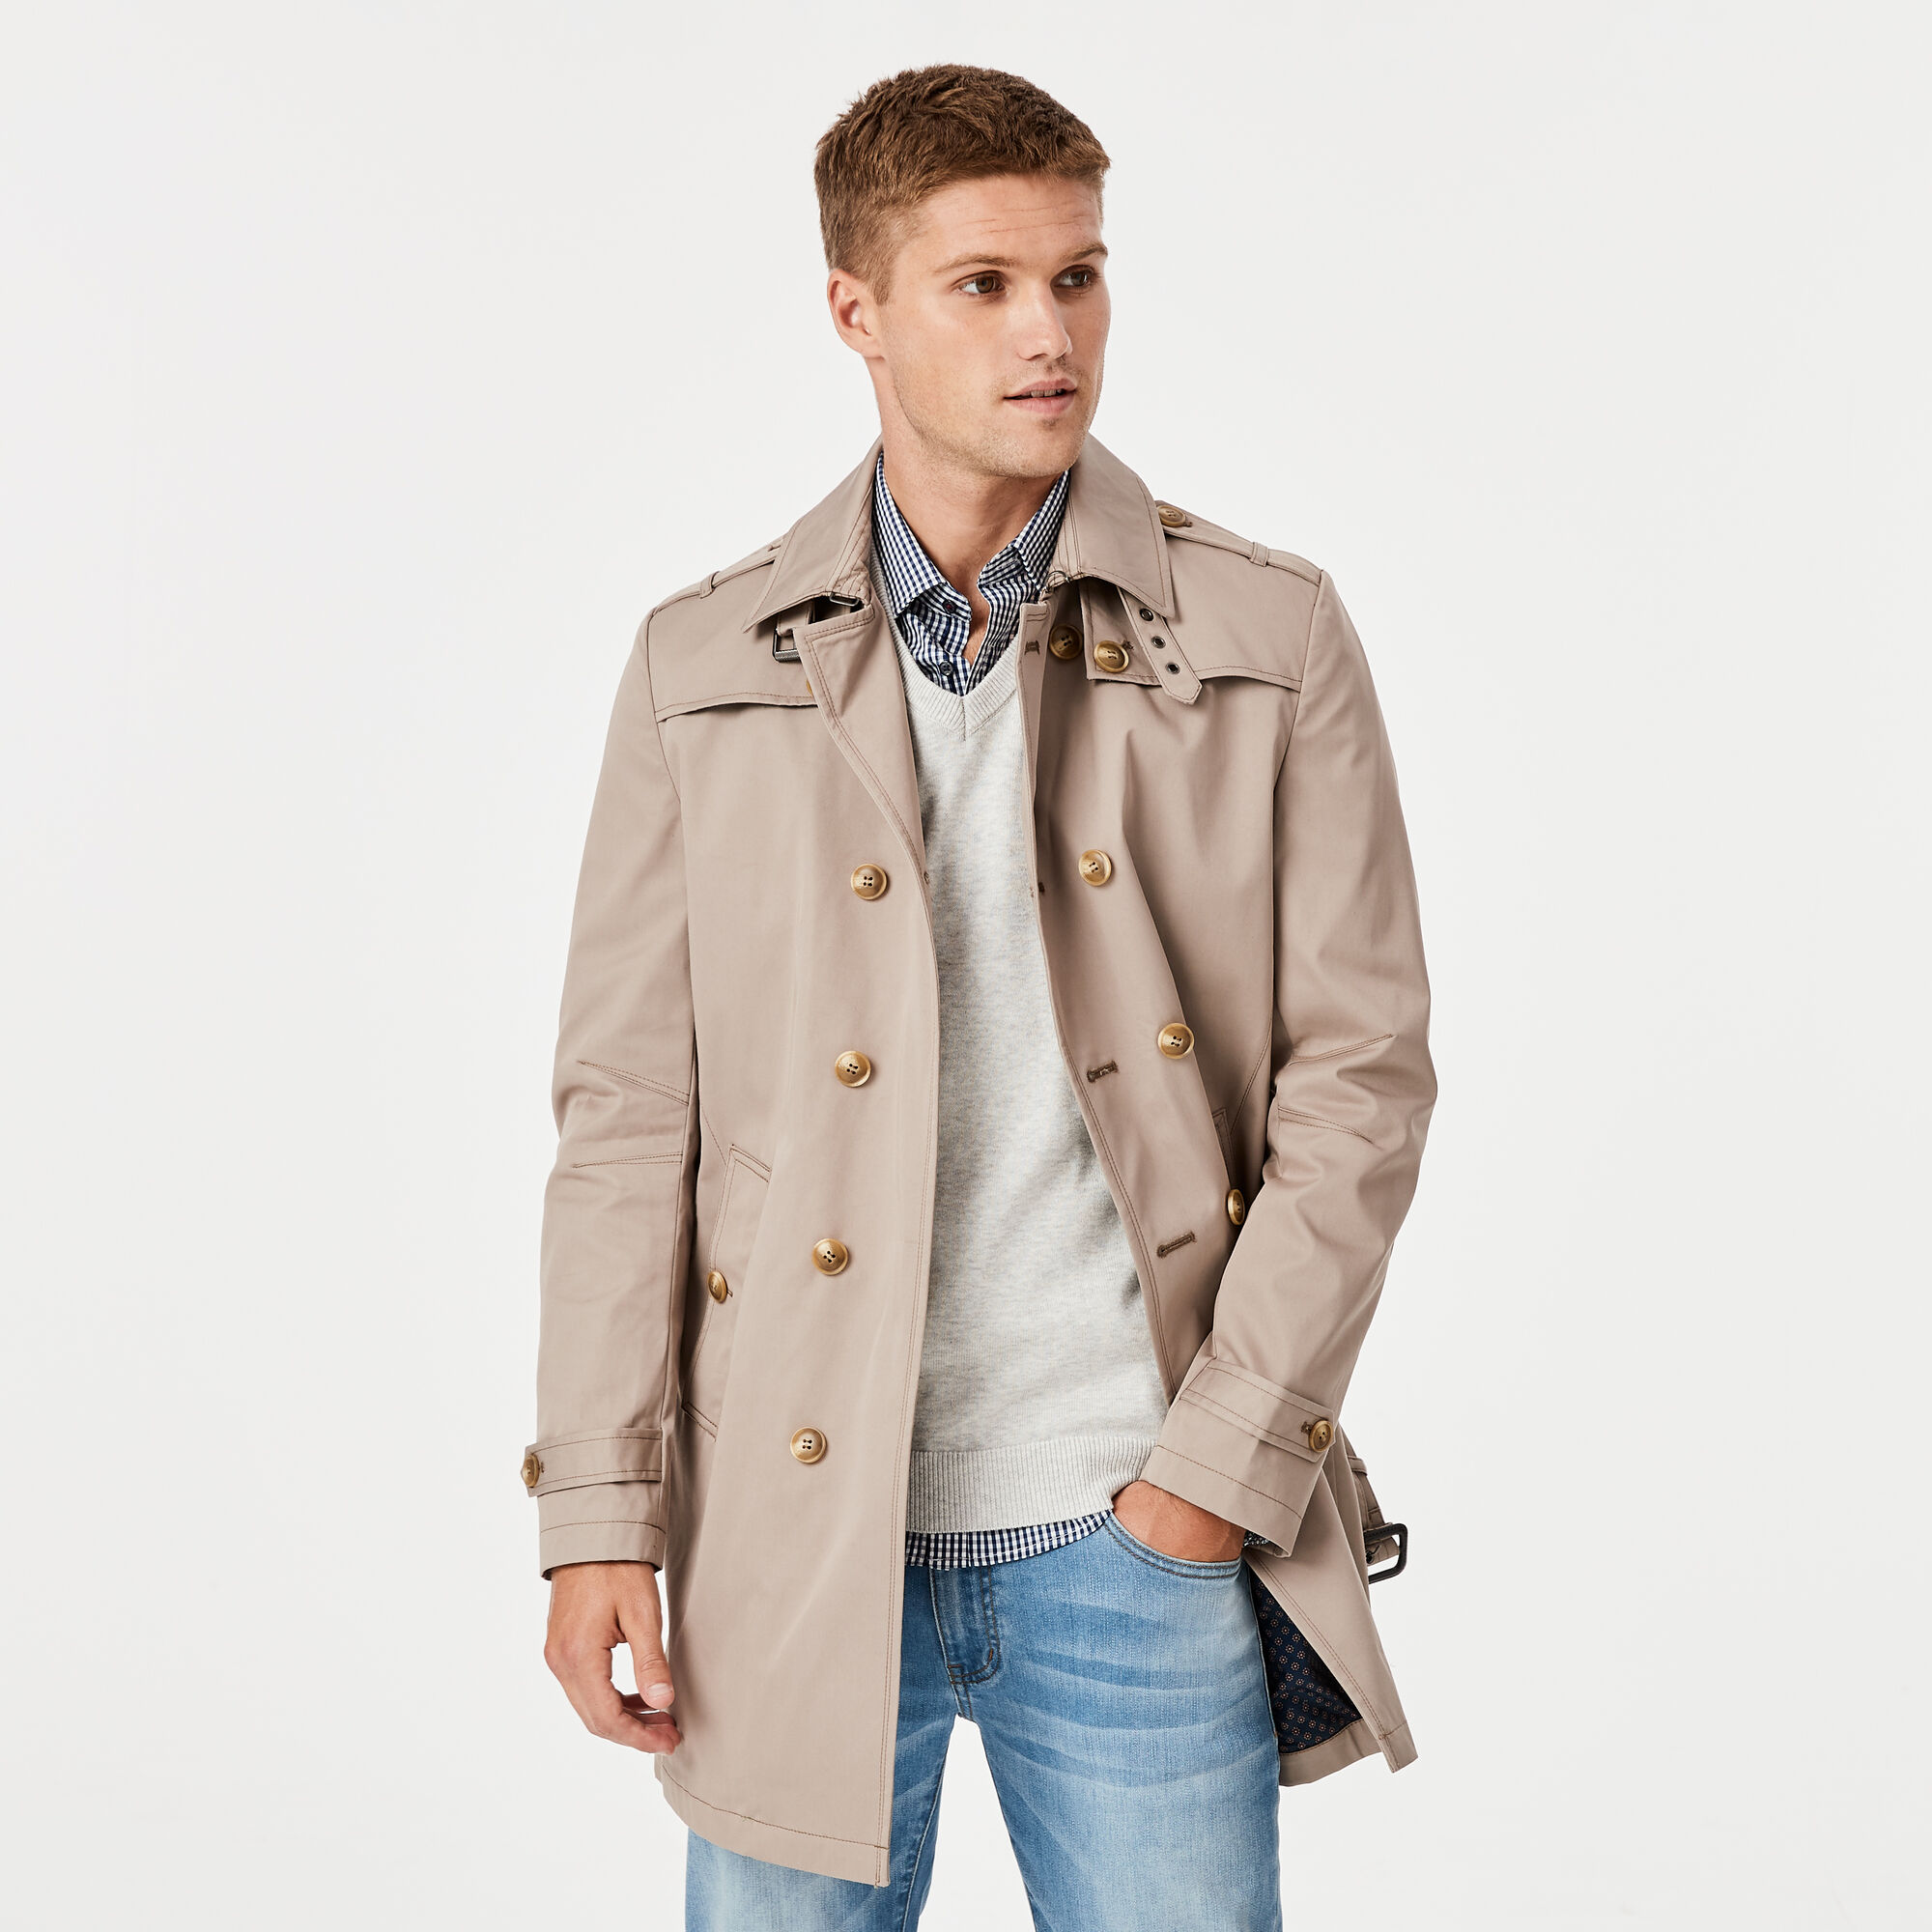 Armadale - Lt Tan - Db Trench Coat Water Resistant | Coats & Jackets ...